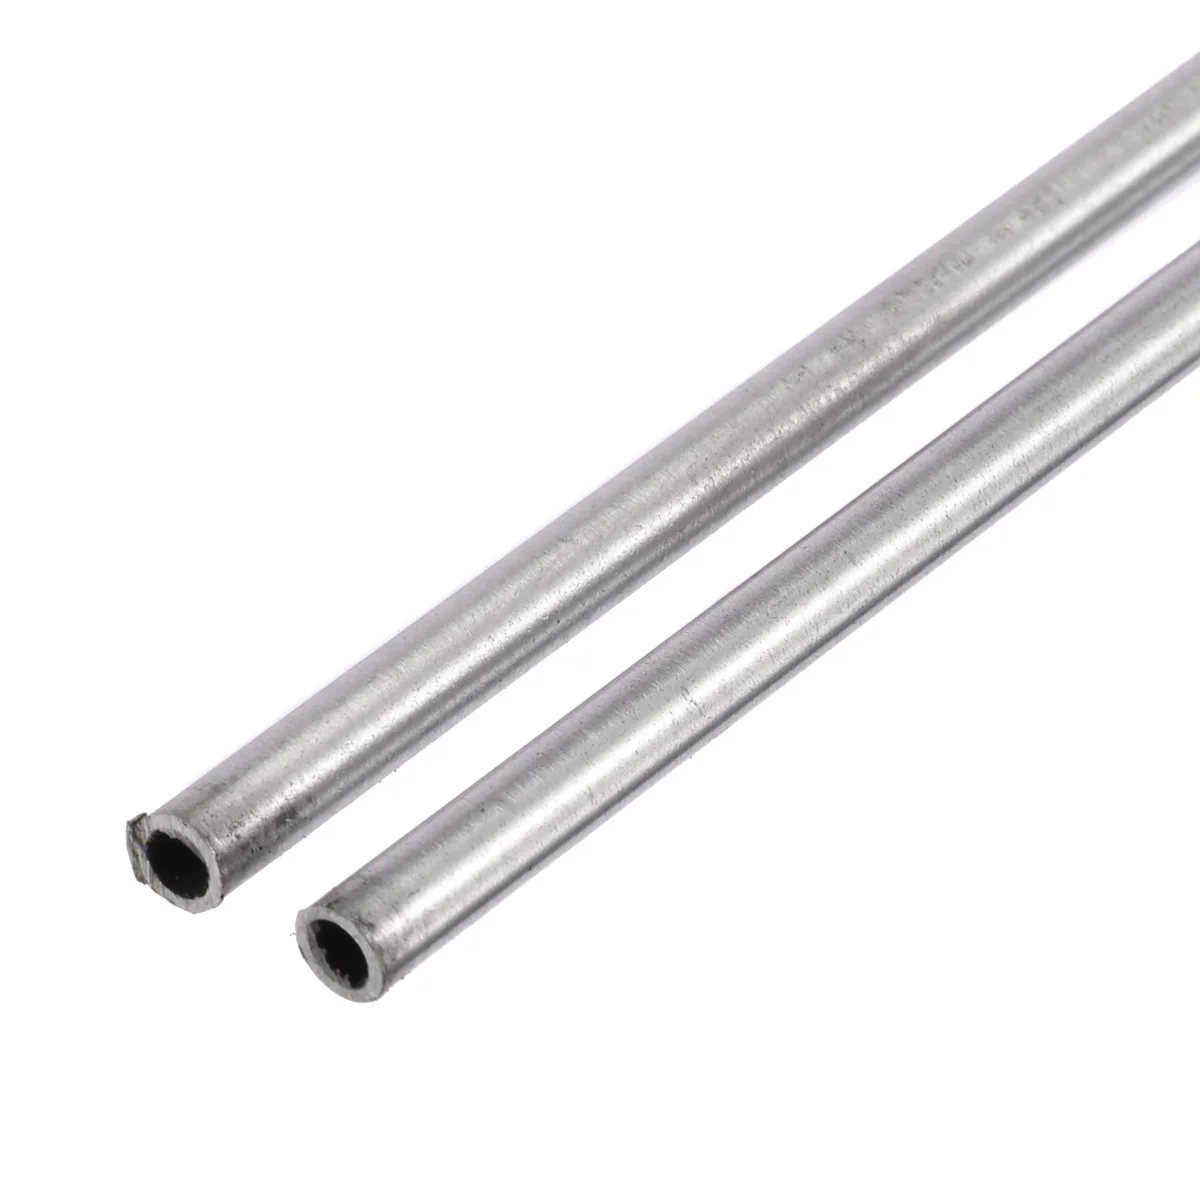 Length 250mm Metal ToolBRIC 304 Stainless Steel Capillary Tube OD 4mm x 3mm ID